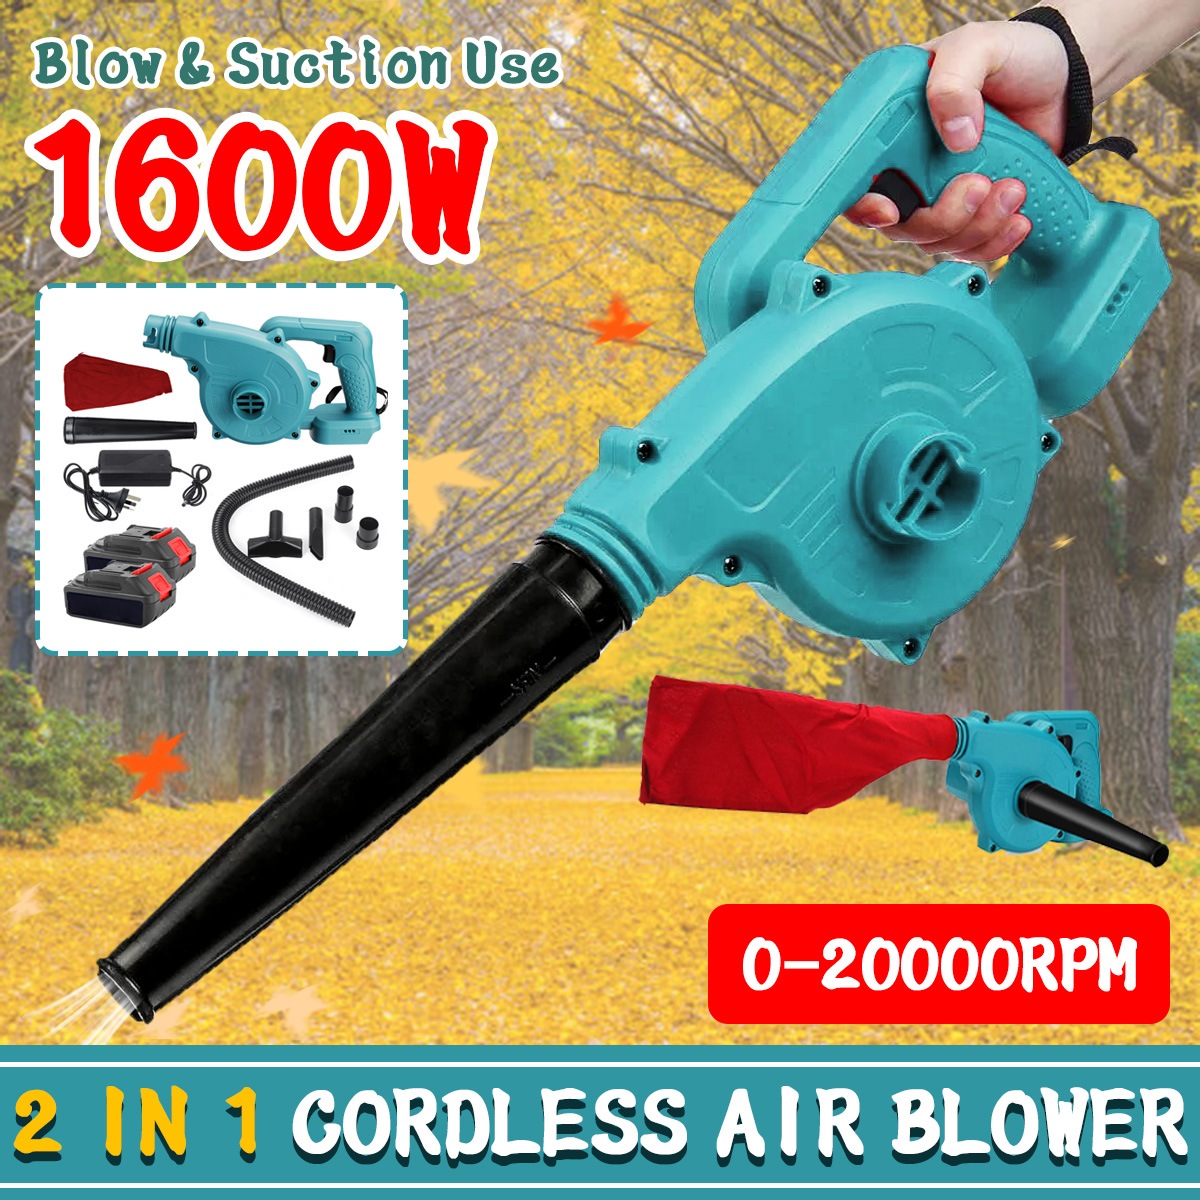 1600W-2-In-1-Cordless-Electric-Air-Blower-Dust-Leaf-Cleaner-Vacuum-Cleannig-Blowing-Tool-W-None12-Ba-1860307-1